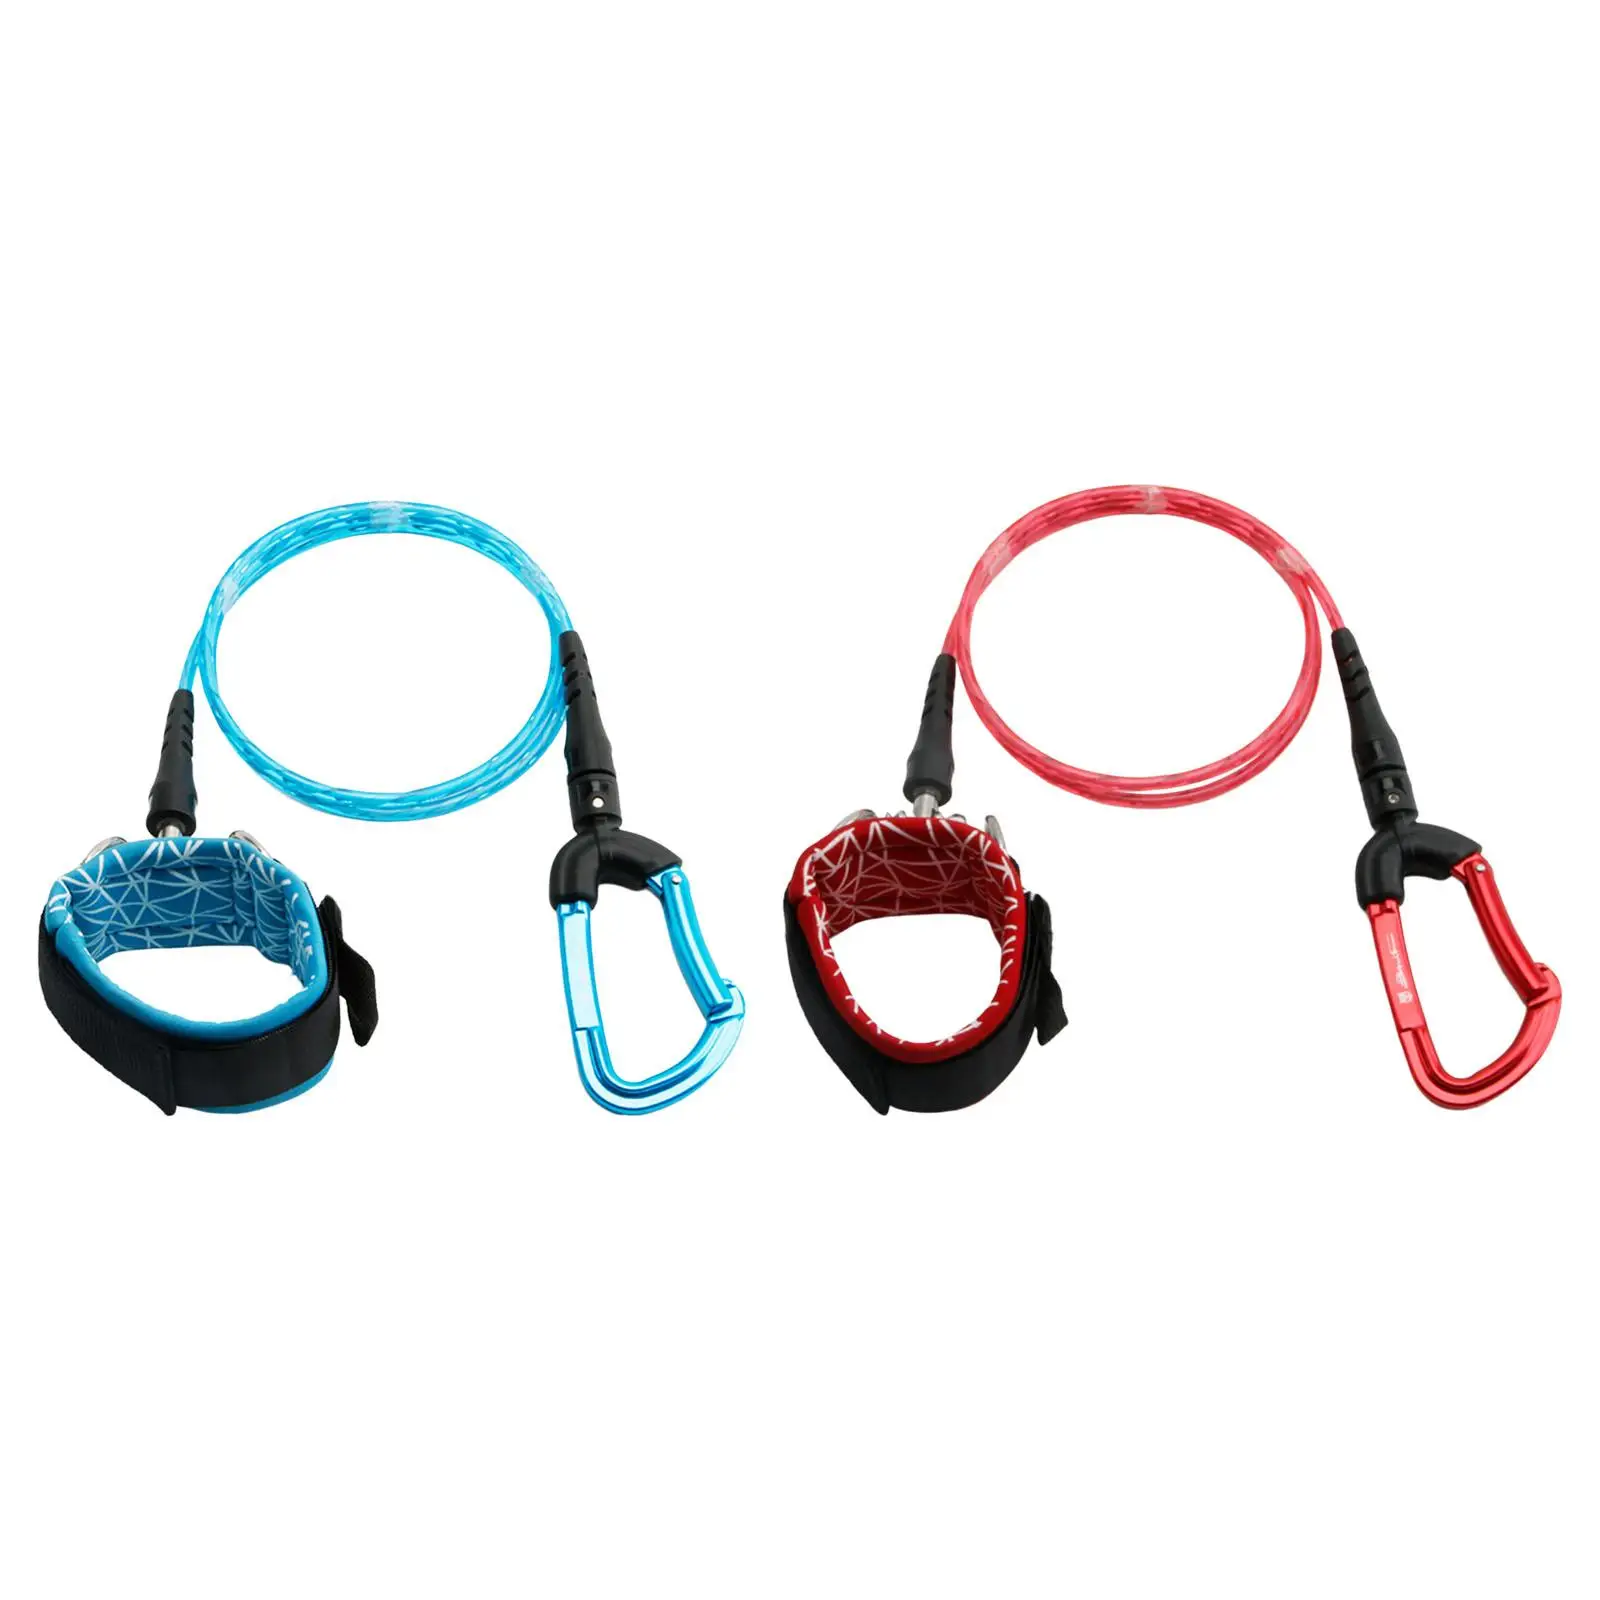 Freediving Lanyard with Comfortable Stainless Steel Professional Dive Wristband Safety Rope Fits for Scuba Diving